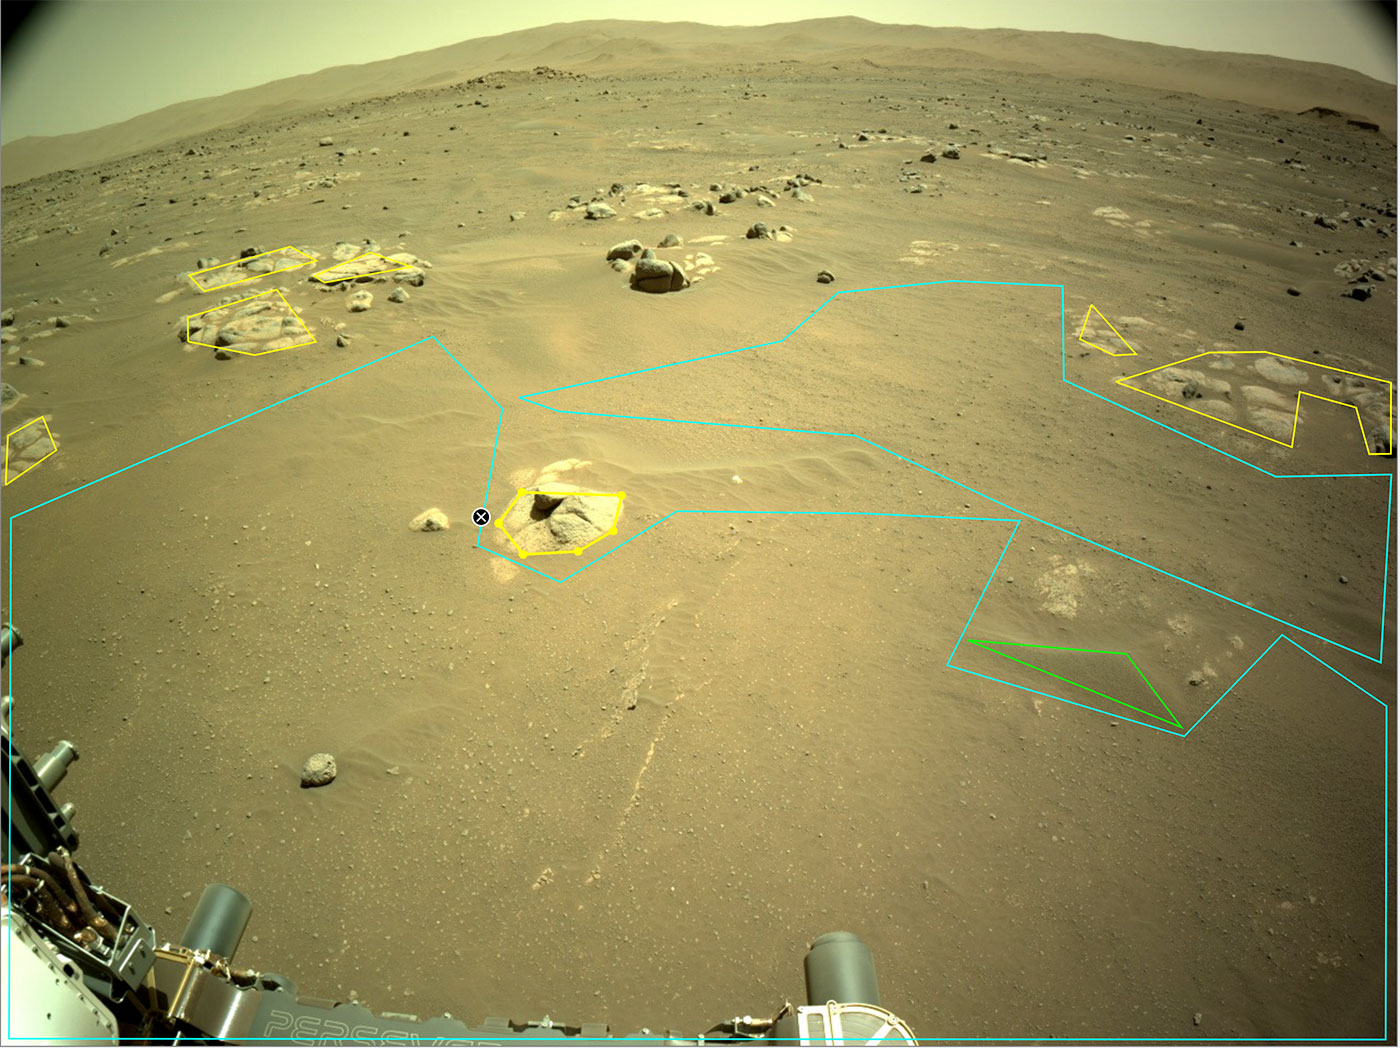 This is an image of the rocky, sandy surface of Mars with outlines of the artificial intelligence software on the image. The artificial intelligence software is outlinig particular rocks int the front view. Low hills are present in the horizon of the image.